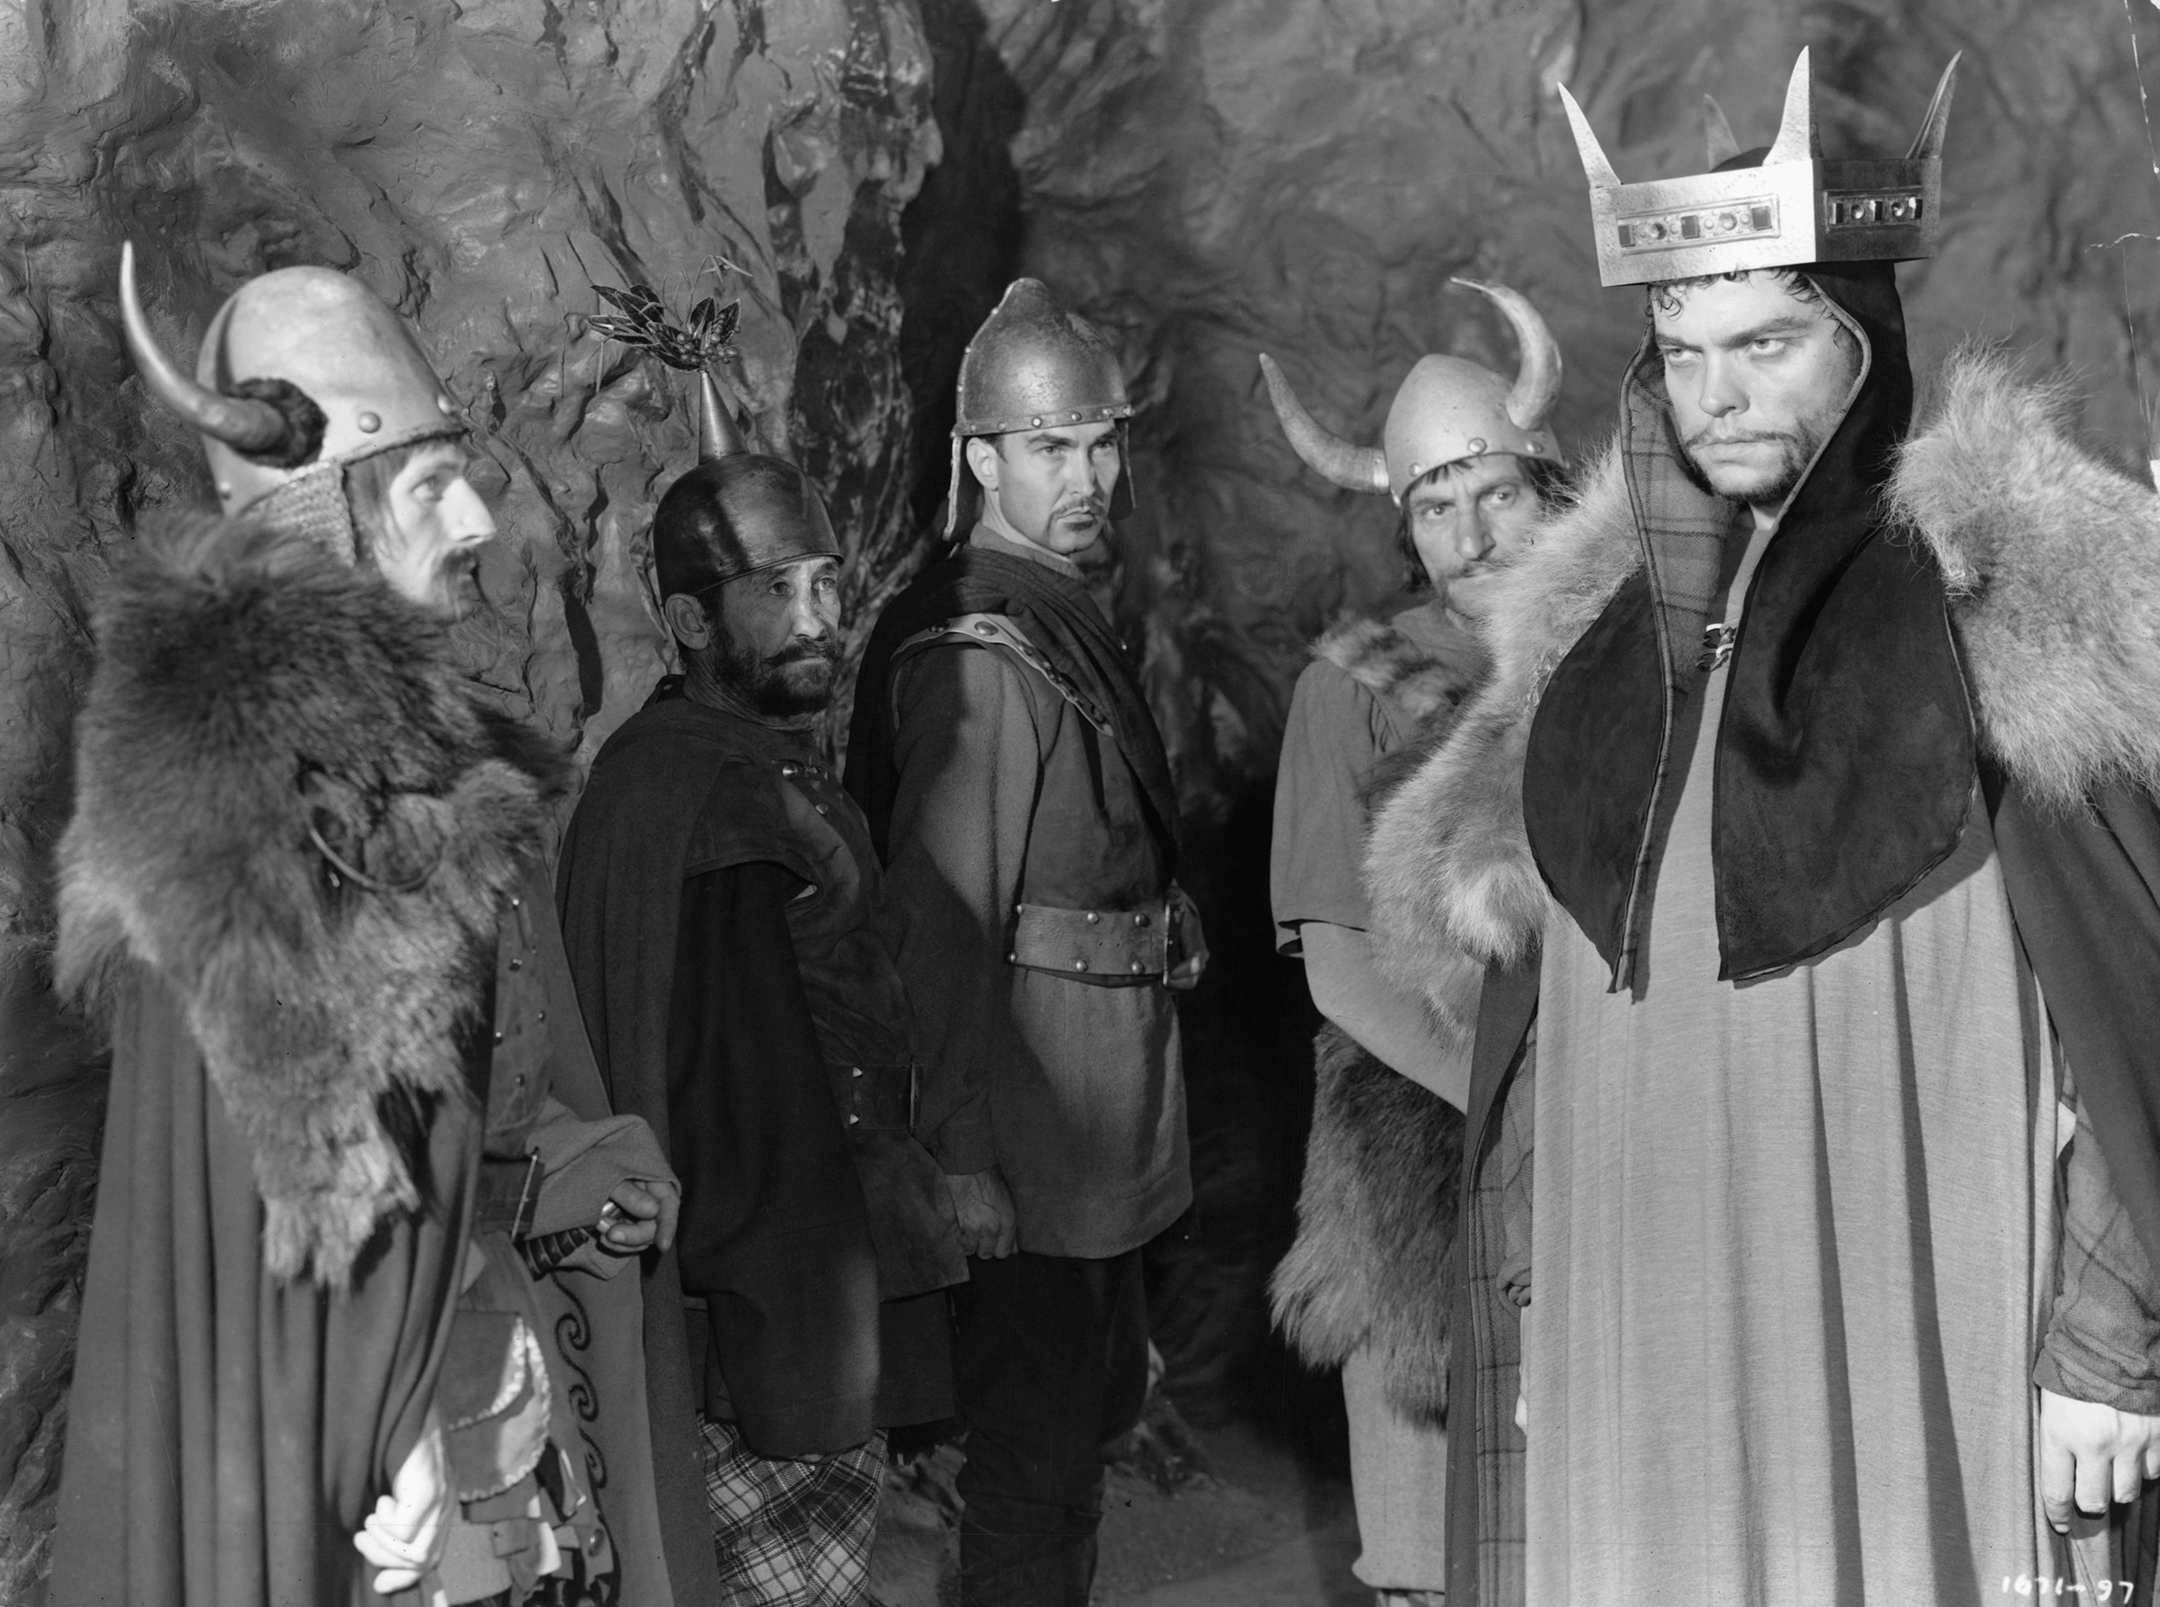 Orson Welles, wearing a crown and robes, looks into the distance while being watched by men in Viking uniforms in a scene from the film 'Macbeth'